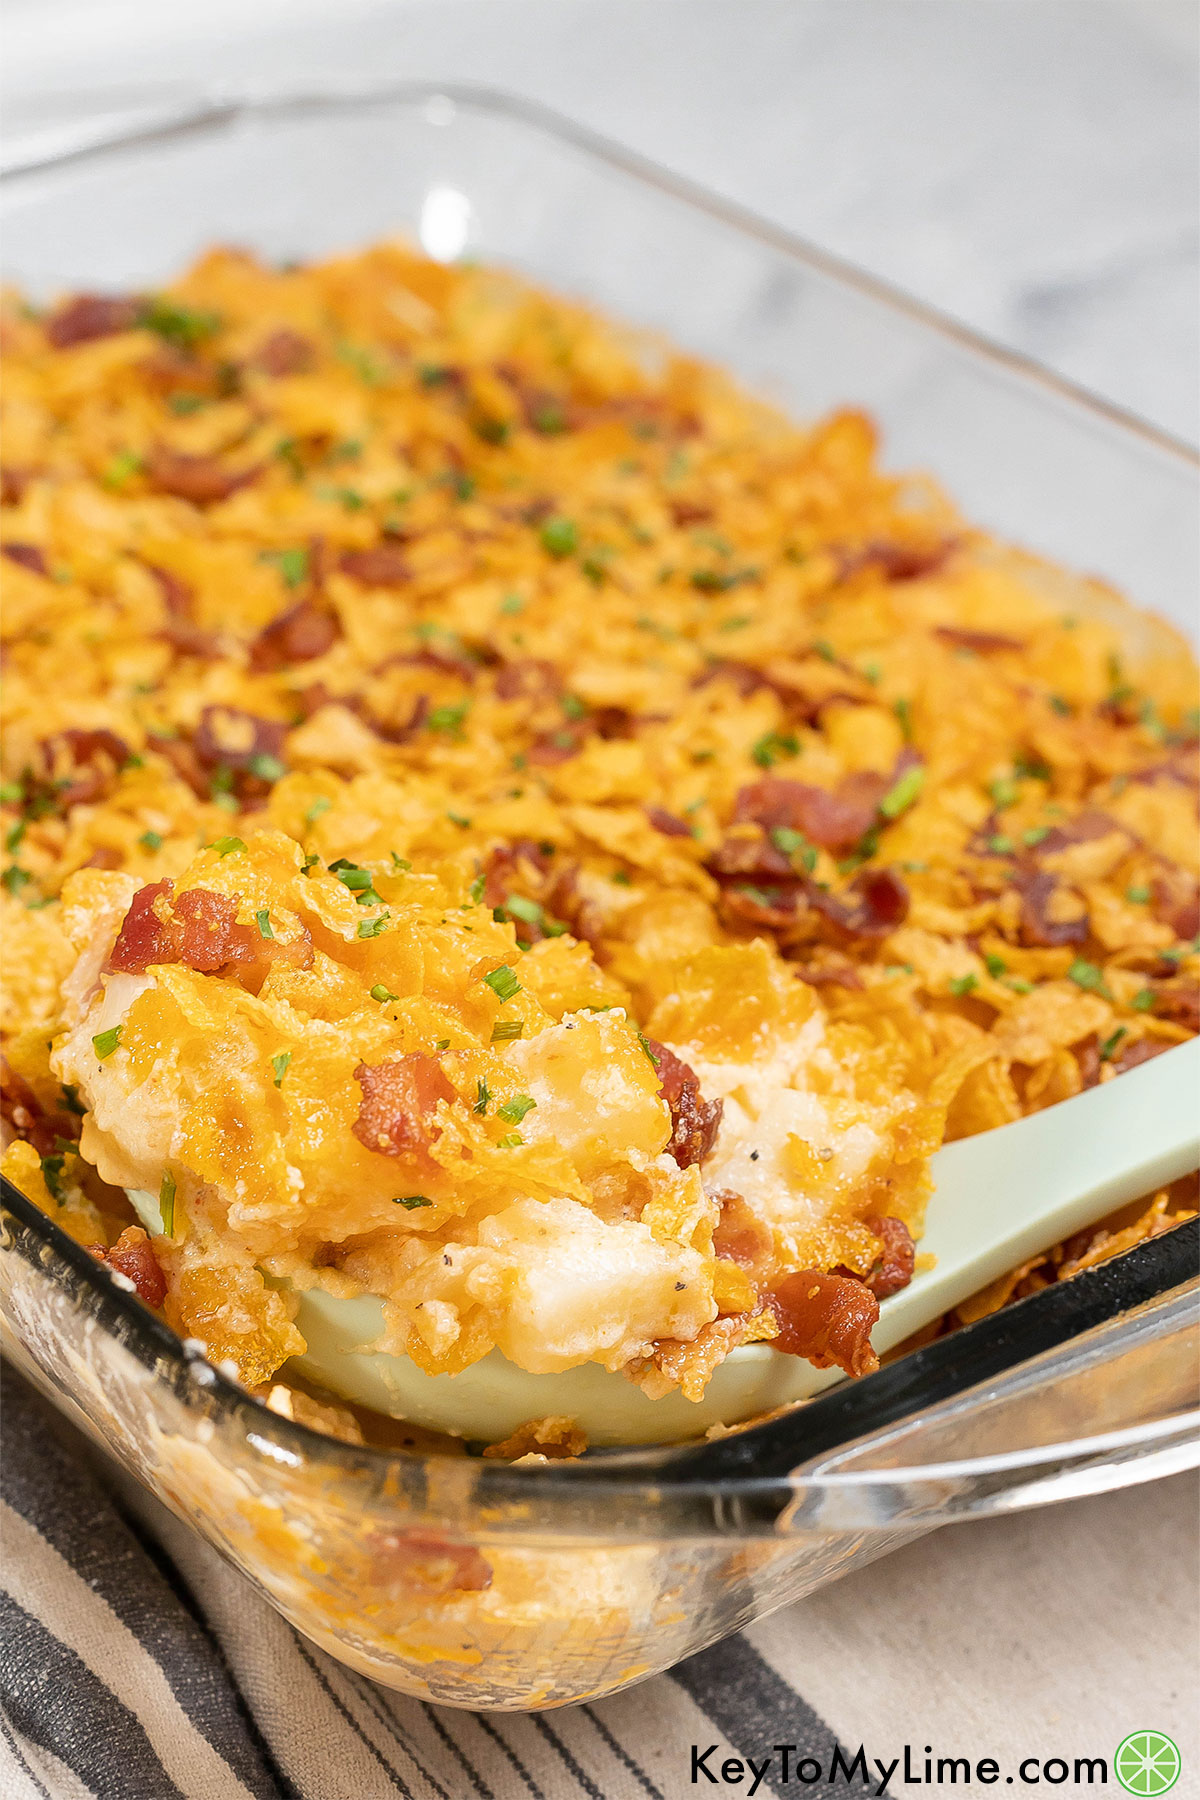 A finished potato casserole with a thick layer of cheese on top in a casserole dish.